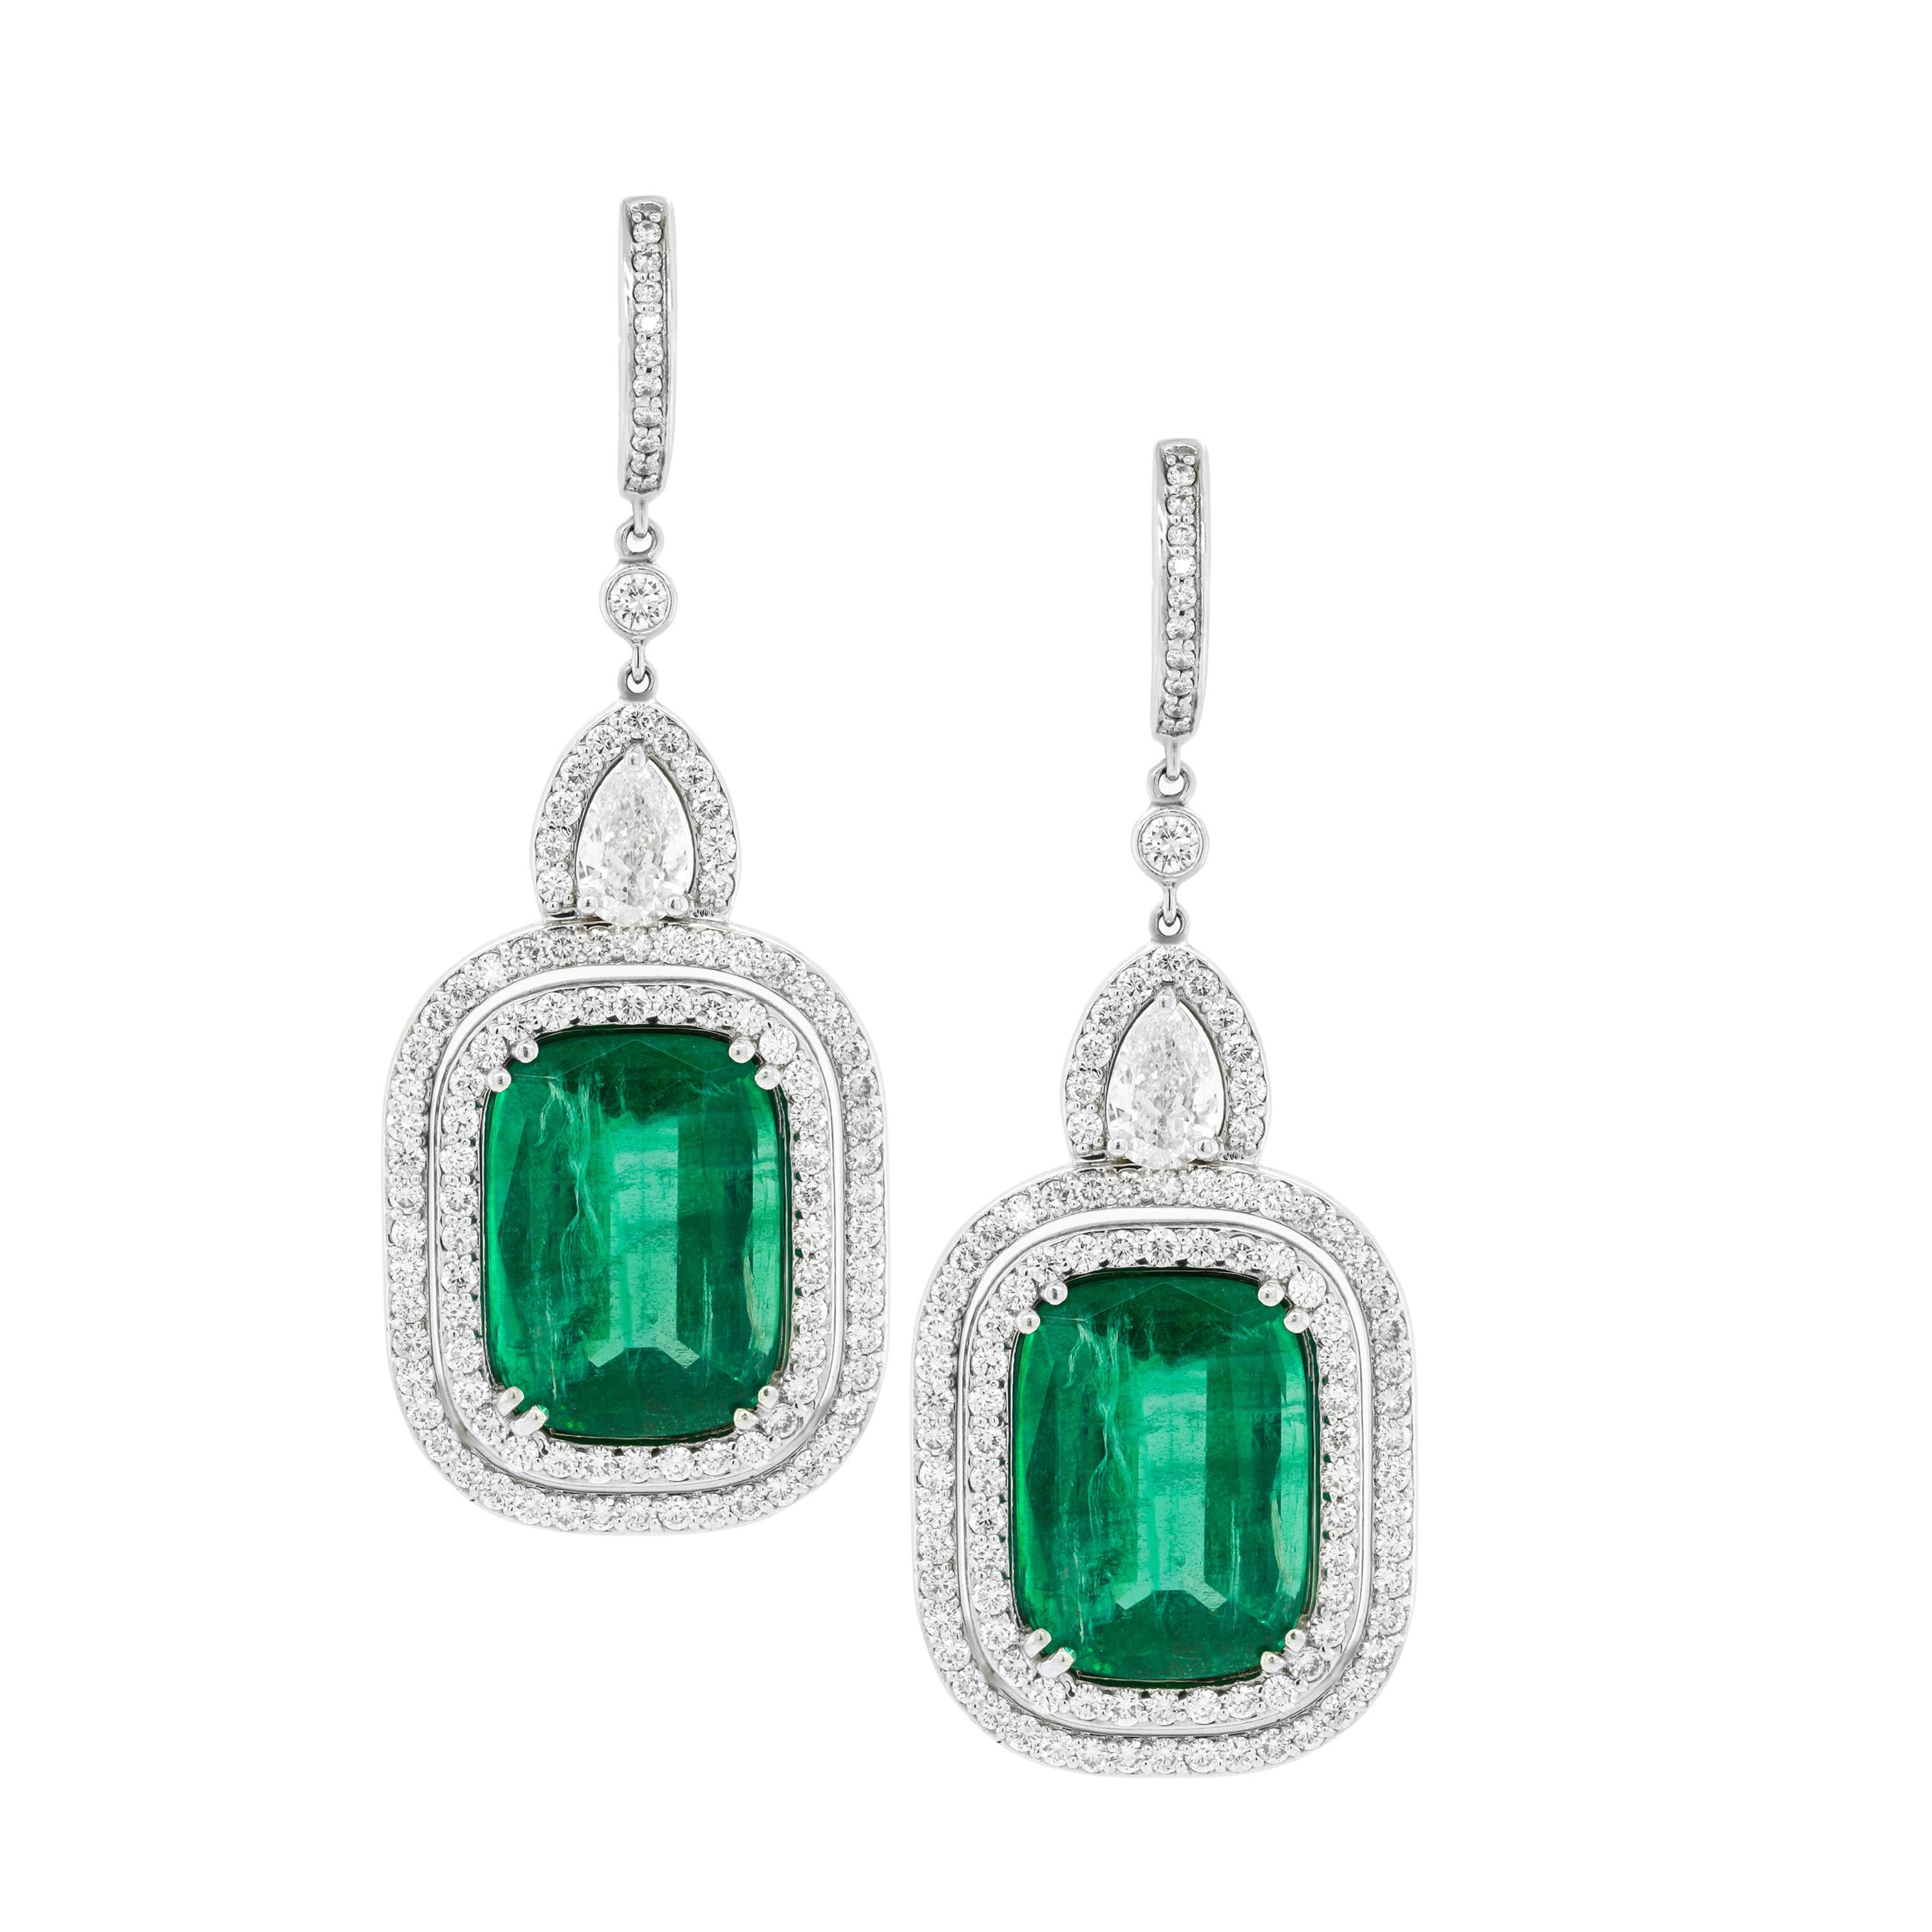 Diana M. 18kt White Gold Earrings with Emerald and Diamonds